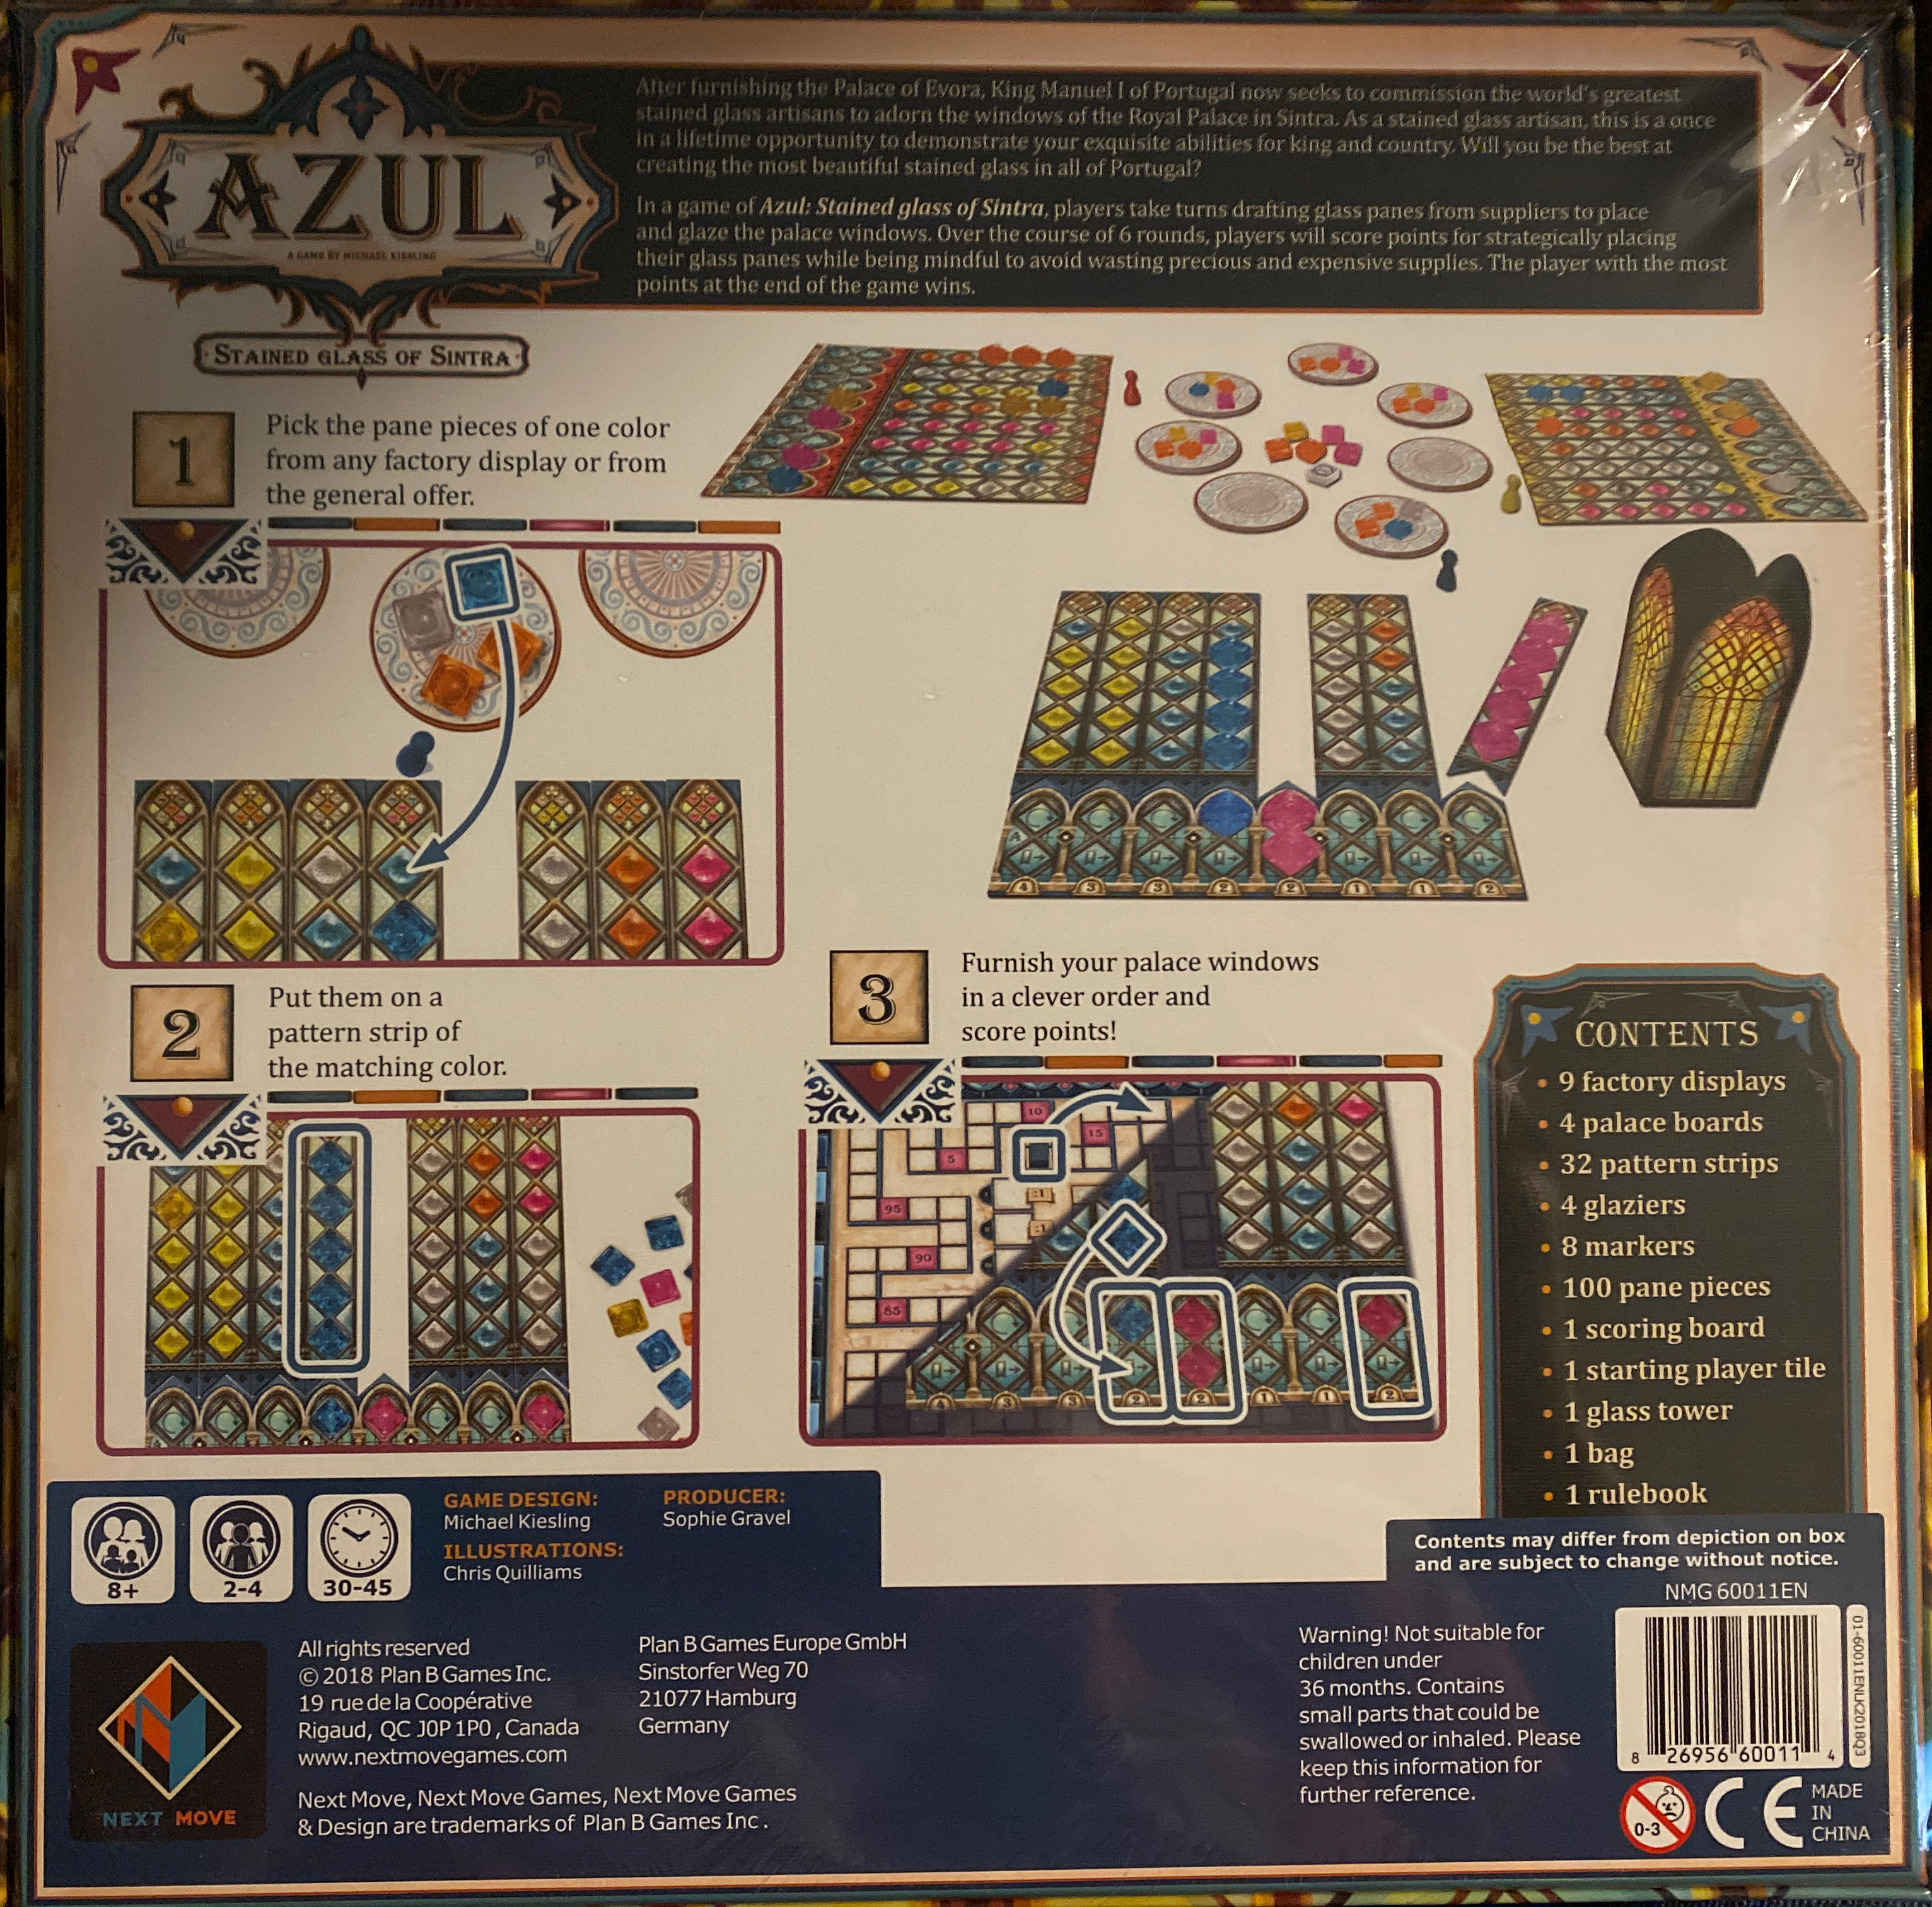 Azul Stained Glass Of Sintra  (2-4) board game collectible [Barcode 826956600114] - Main Image 2